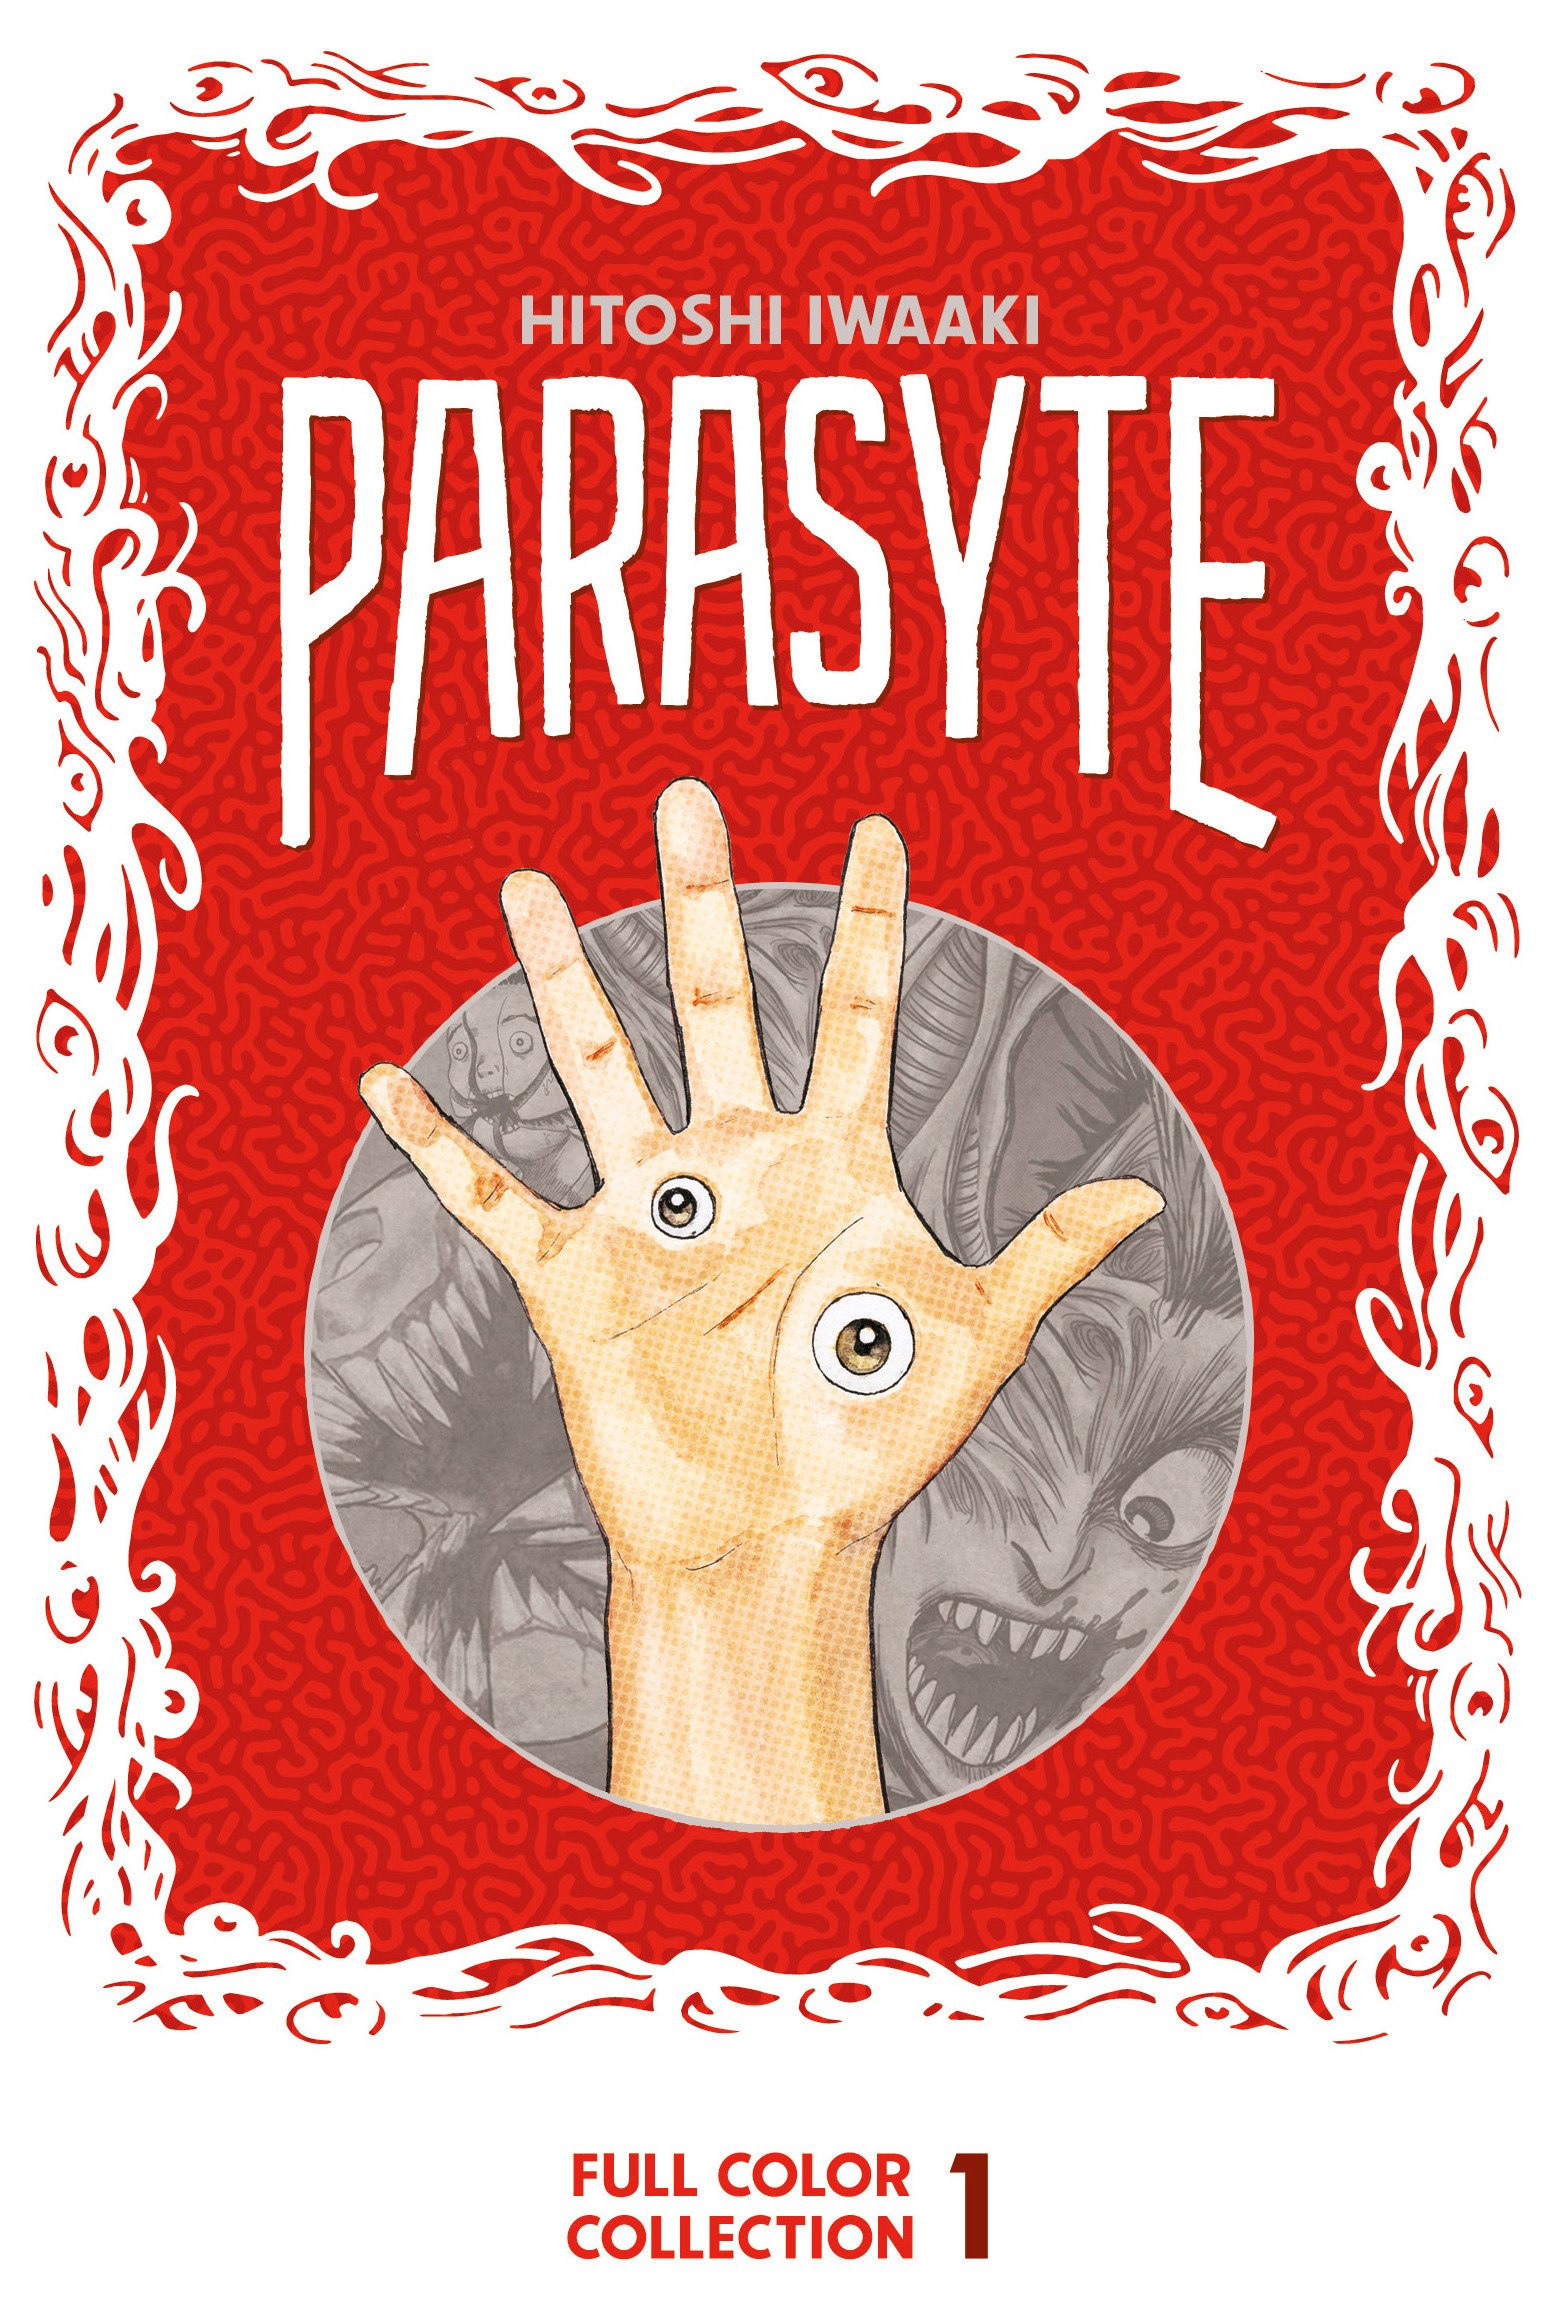 Parasyte Full Color Collection Manga Hardcover 1 (Mature)